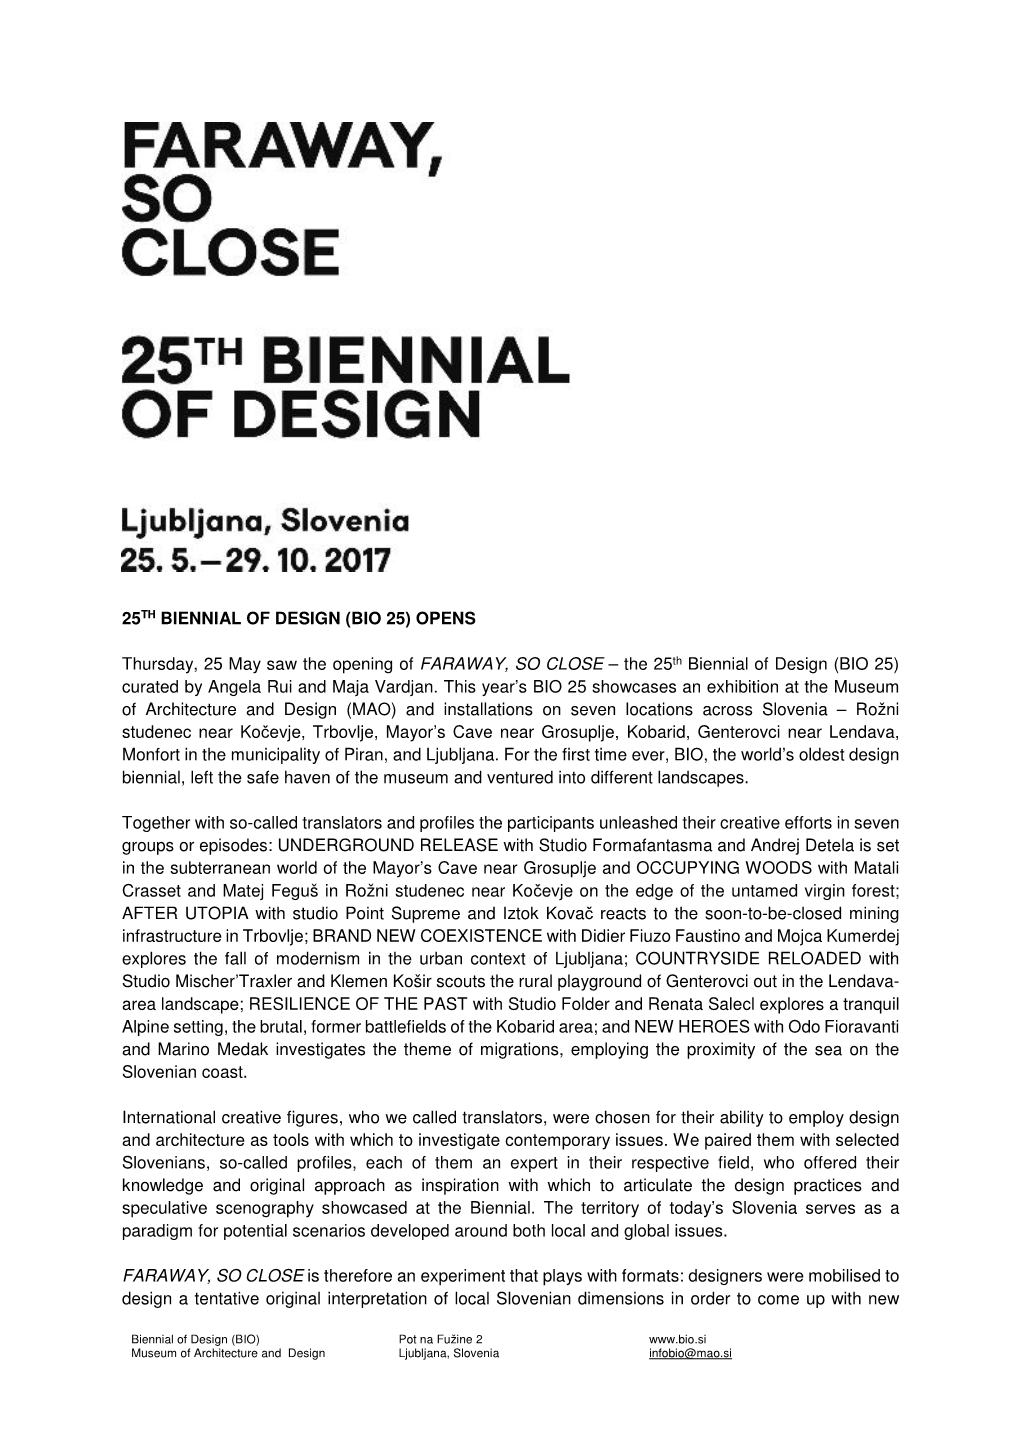 25TH BIENNIAL of DESIGN (BIO 25) OPENS Thursday, 25 May Saw The